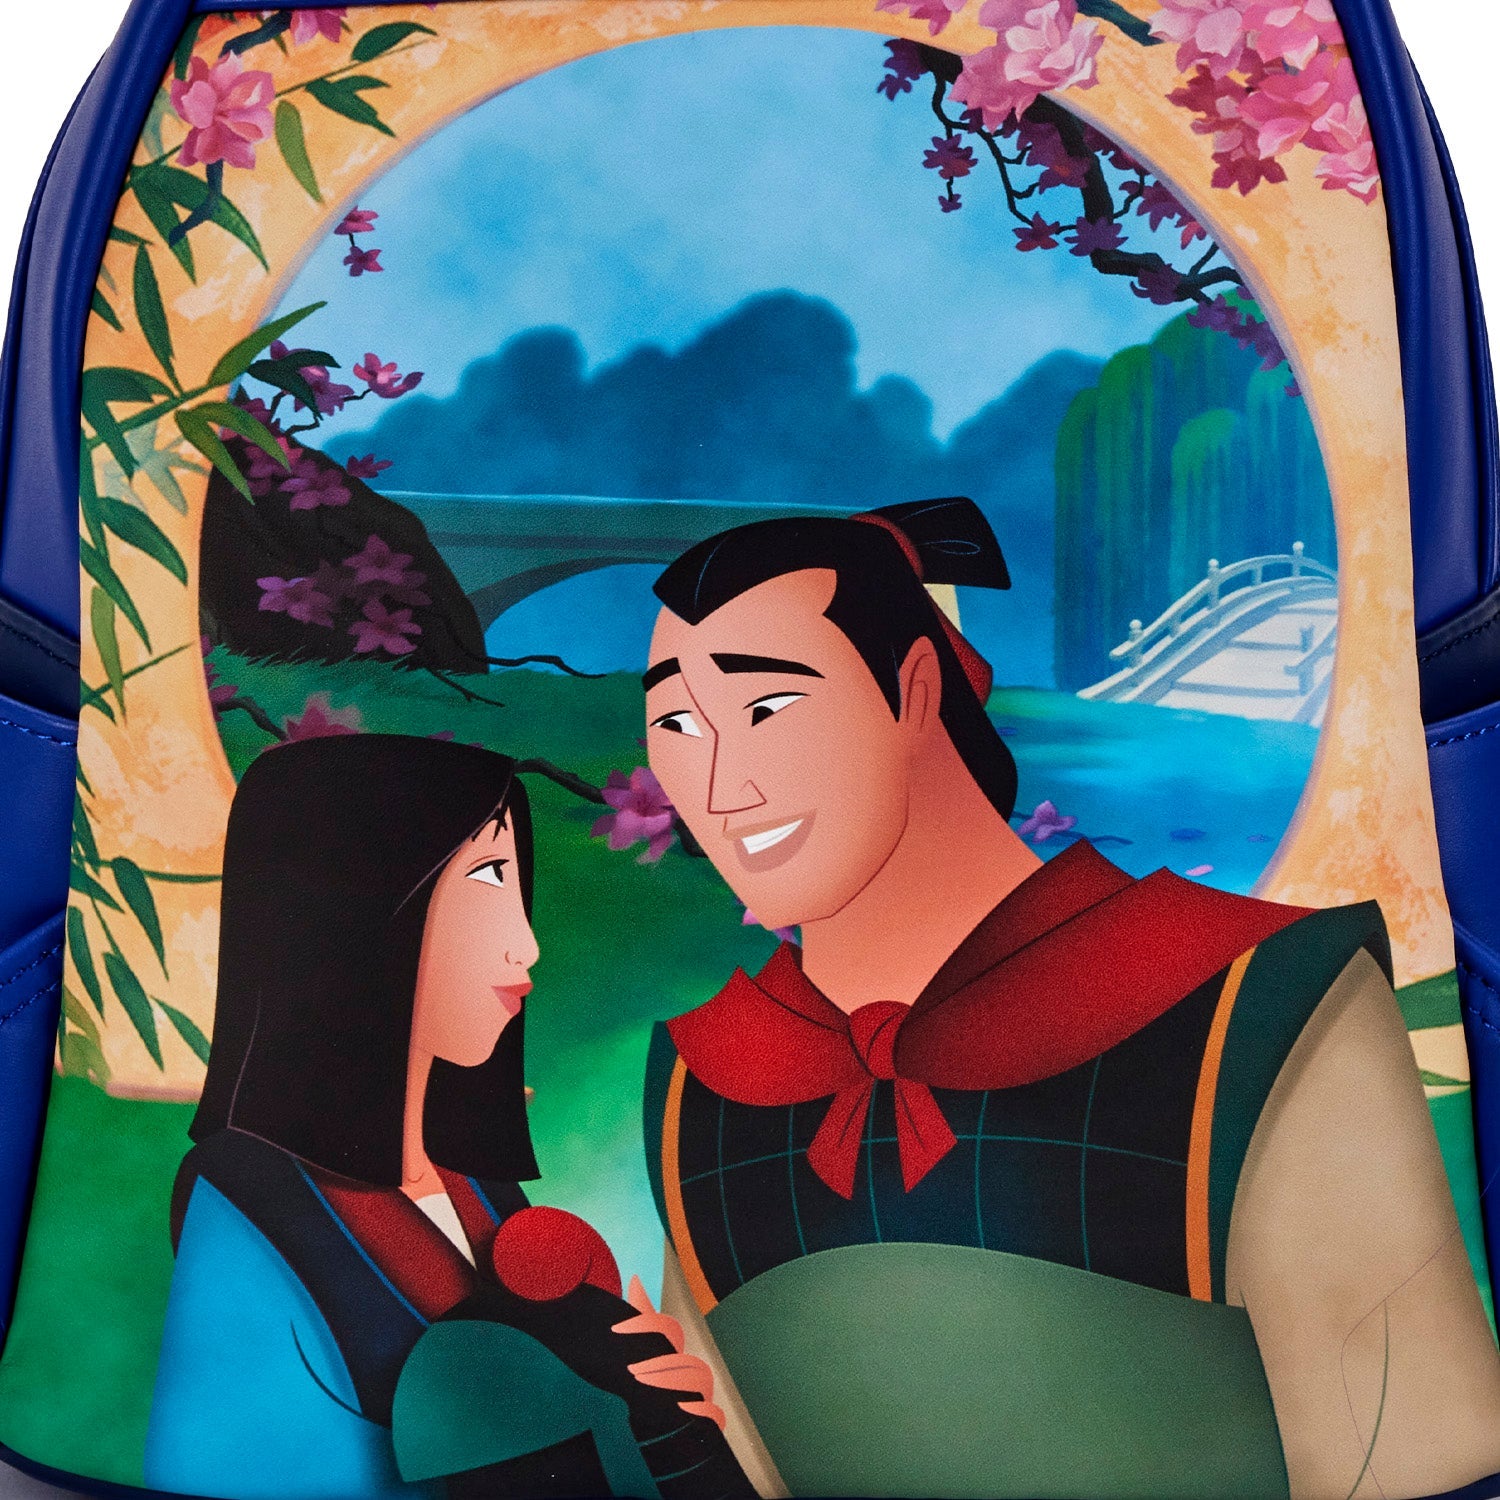 Loungefly x Disney Mulan Castle Light Up Mini Backpack - GeekCore